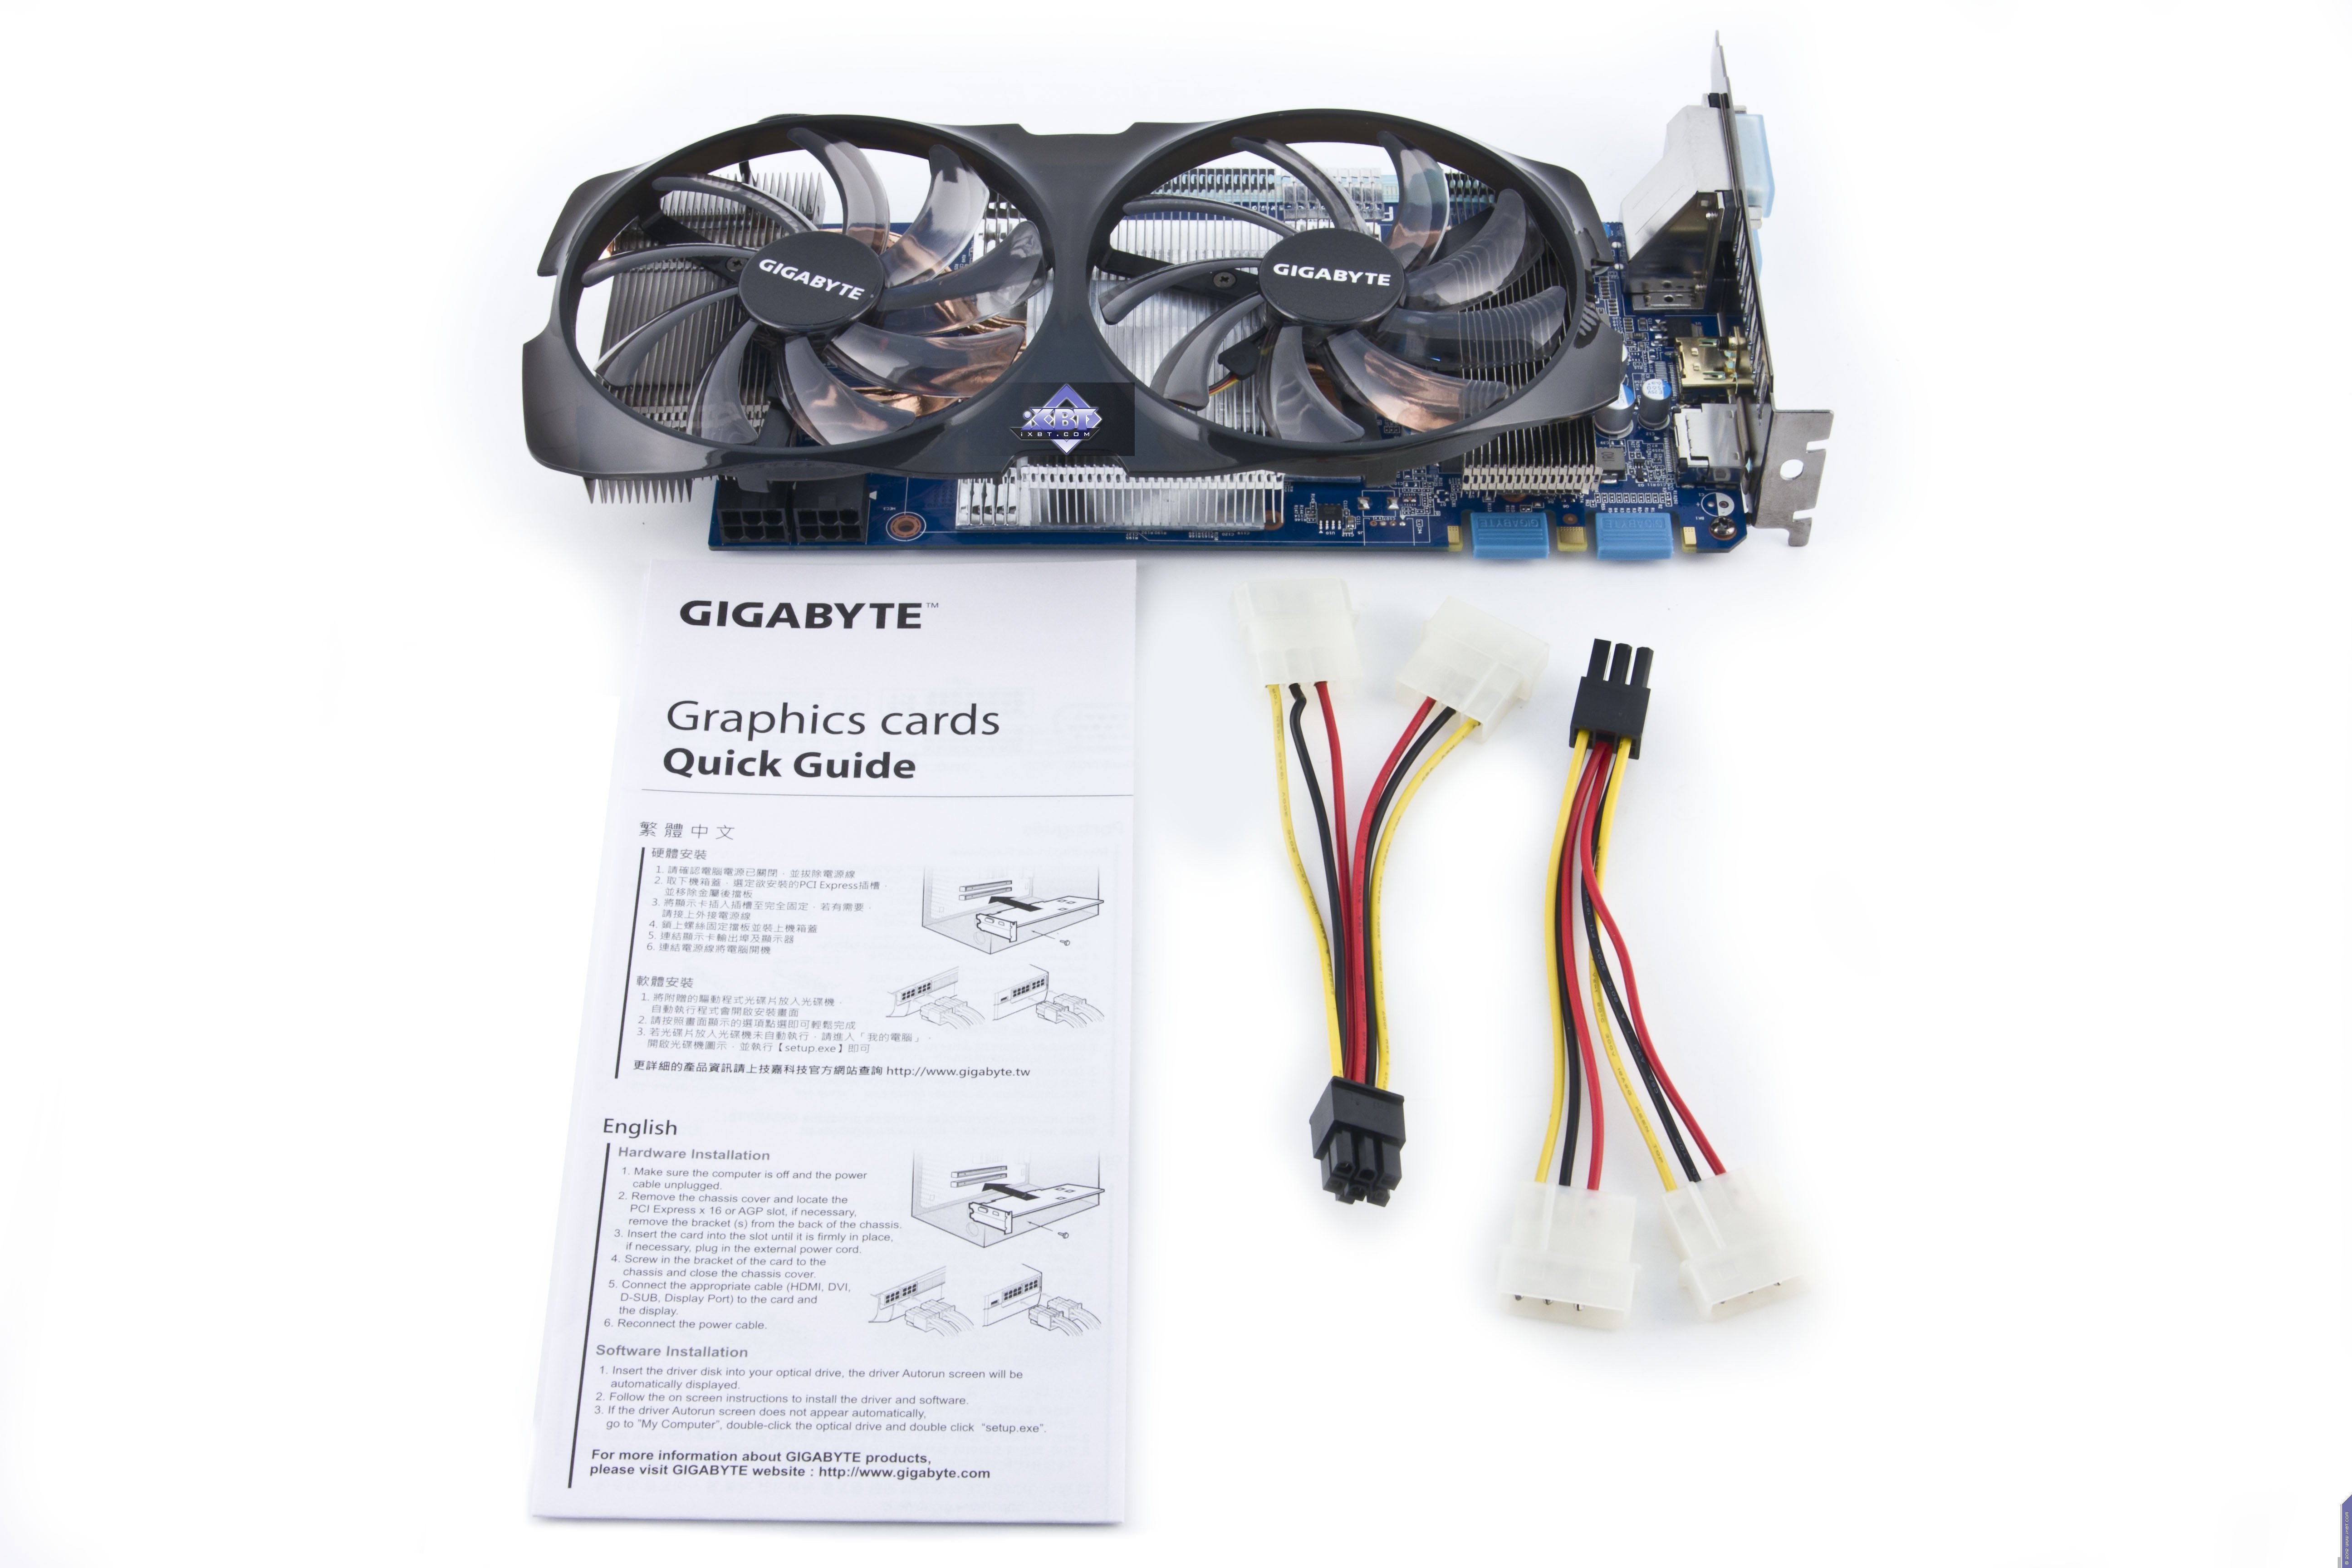 Change attract friction Gigabyte GeForce GTX 660 Ti Overclock Edition Graphics Card - Page 3:  Packages, boxes